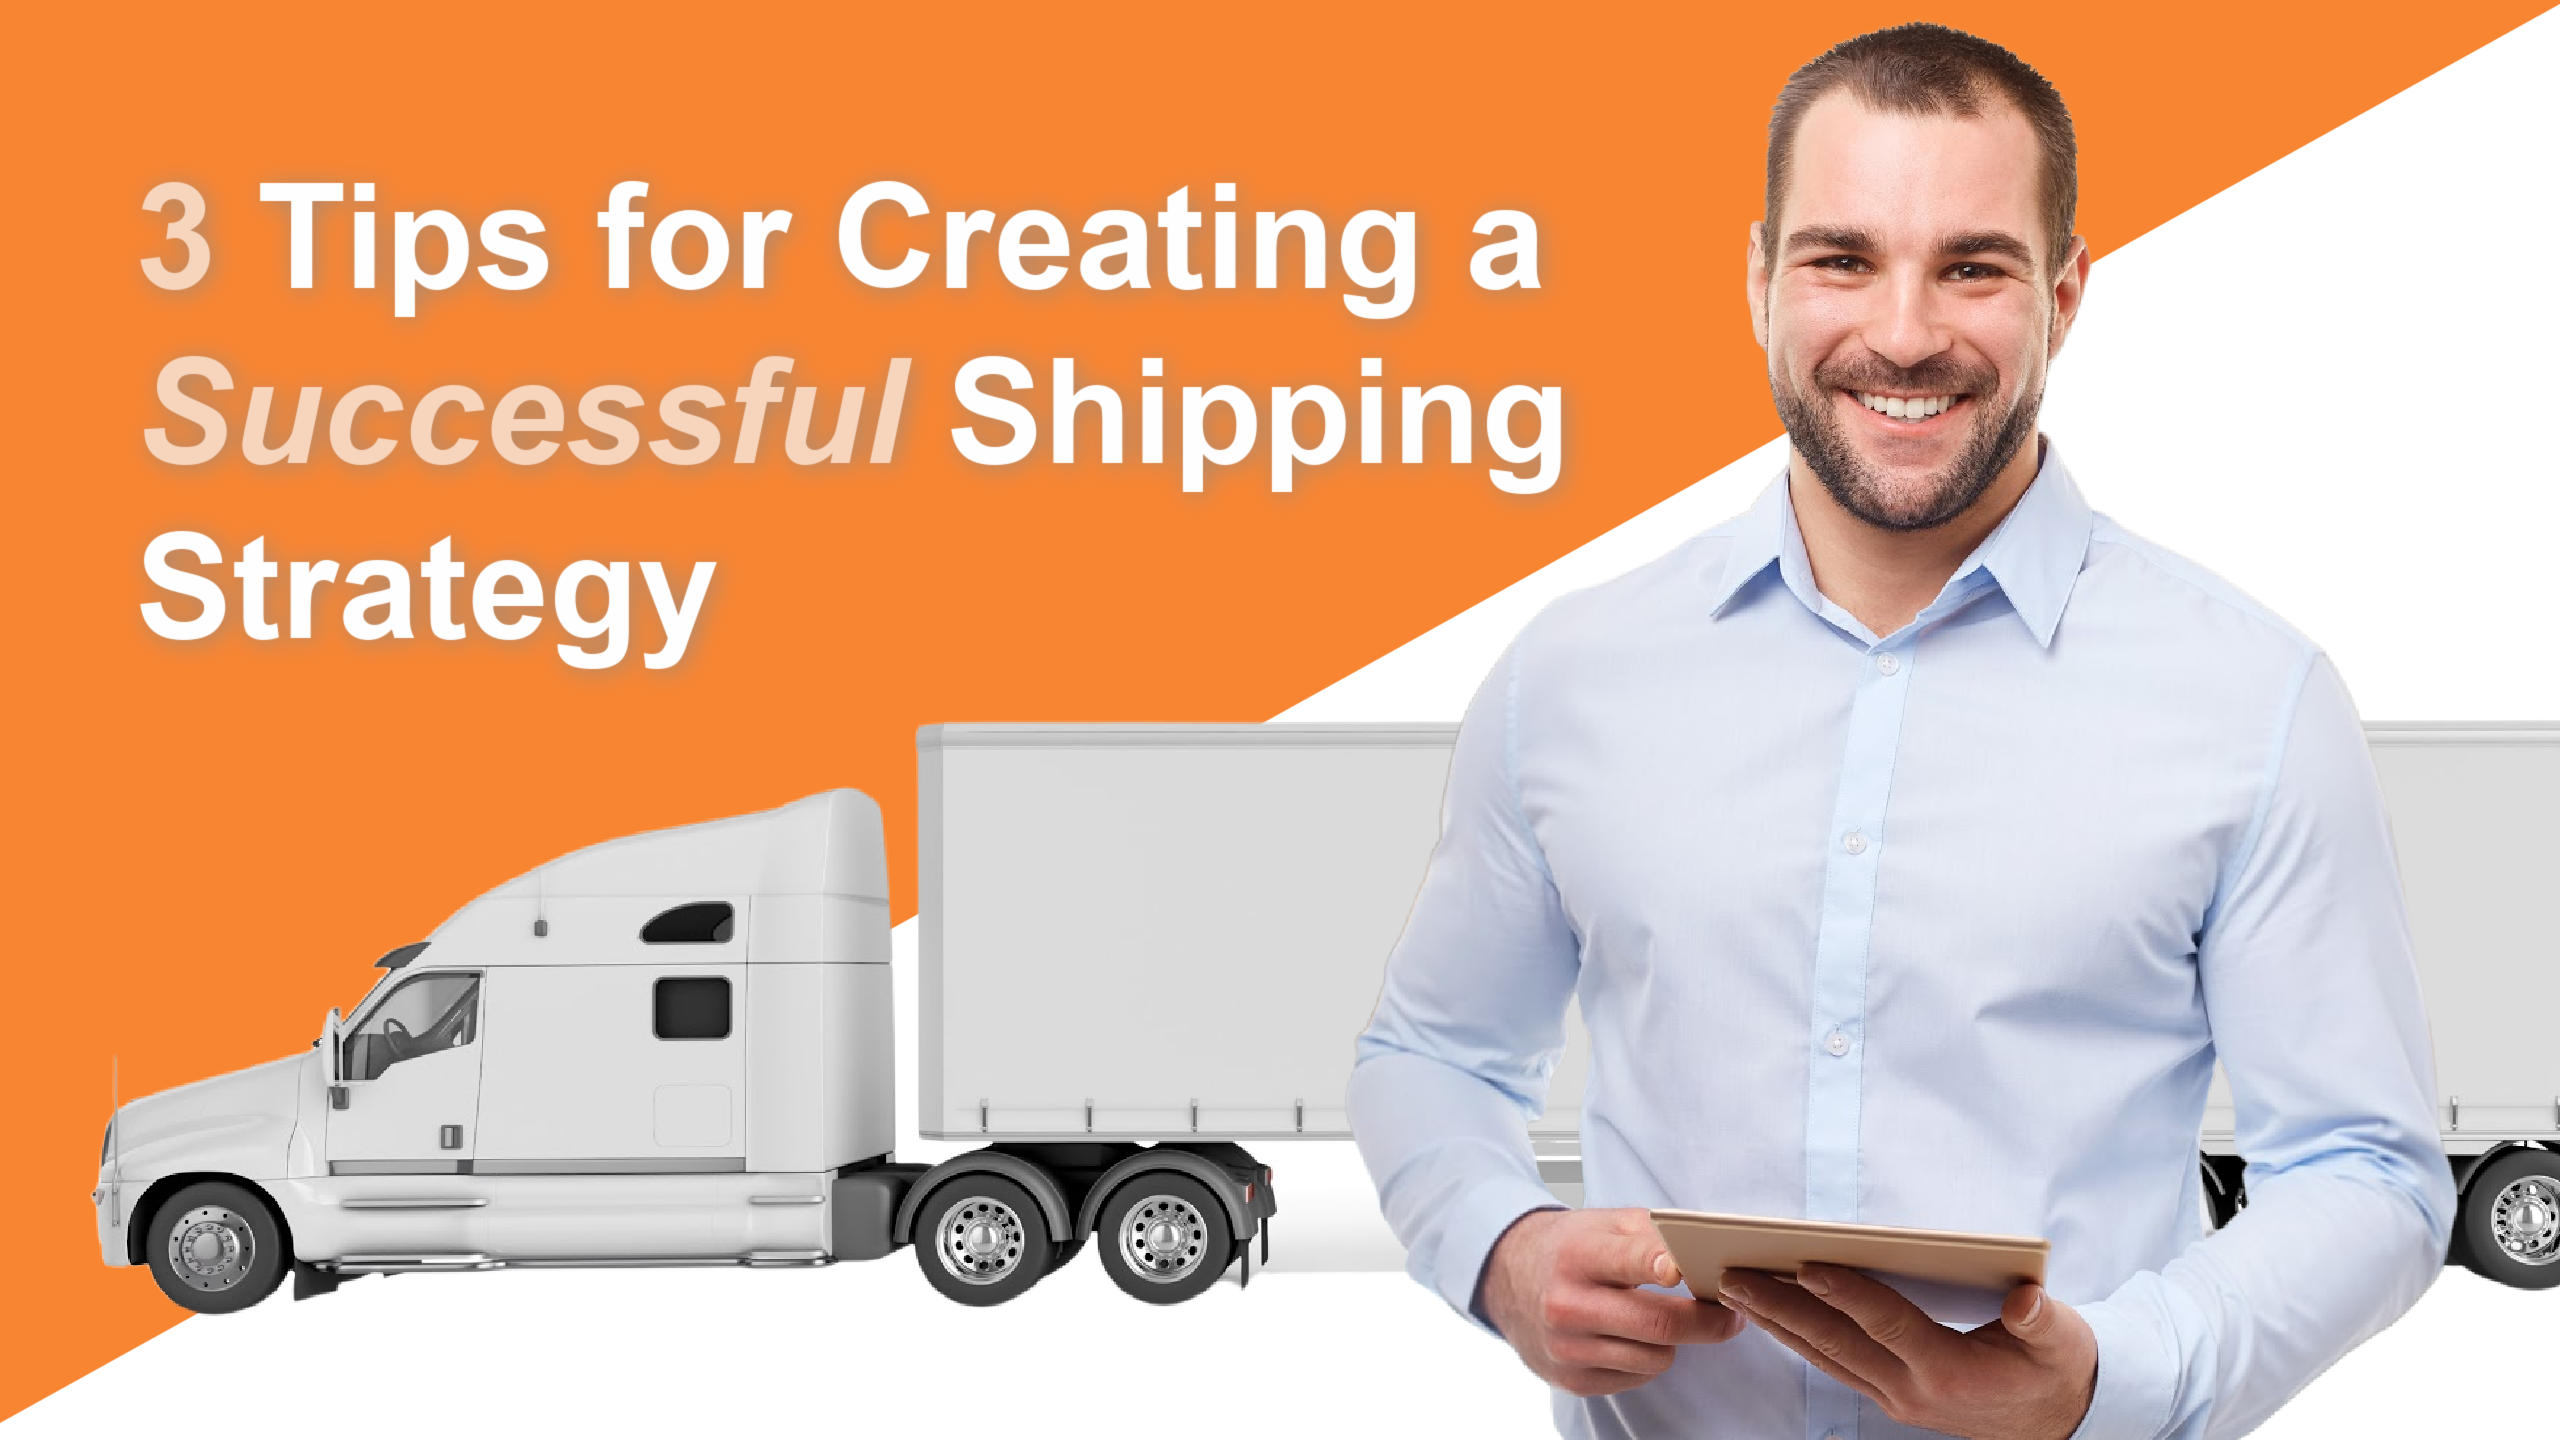 3 Tips for Creating a Successful Shipping Strategy